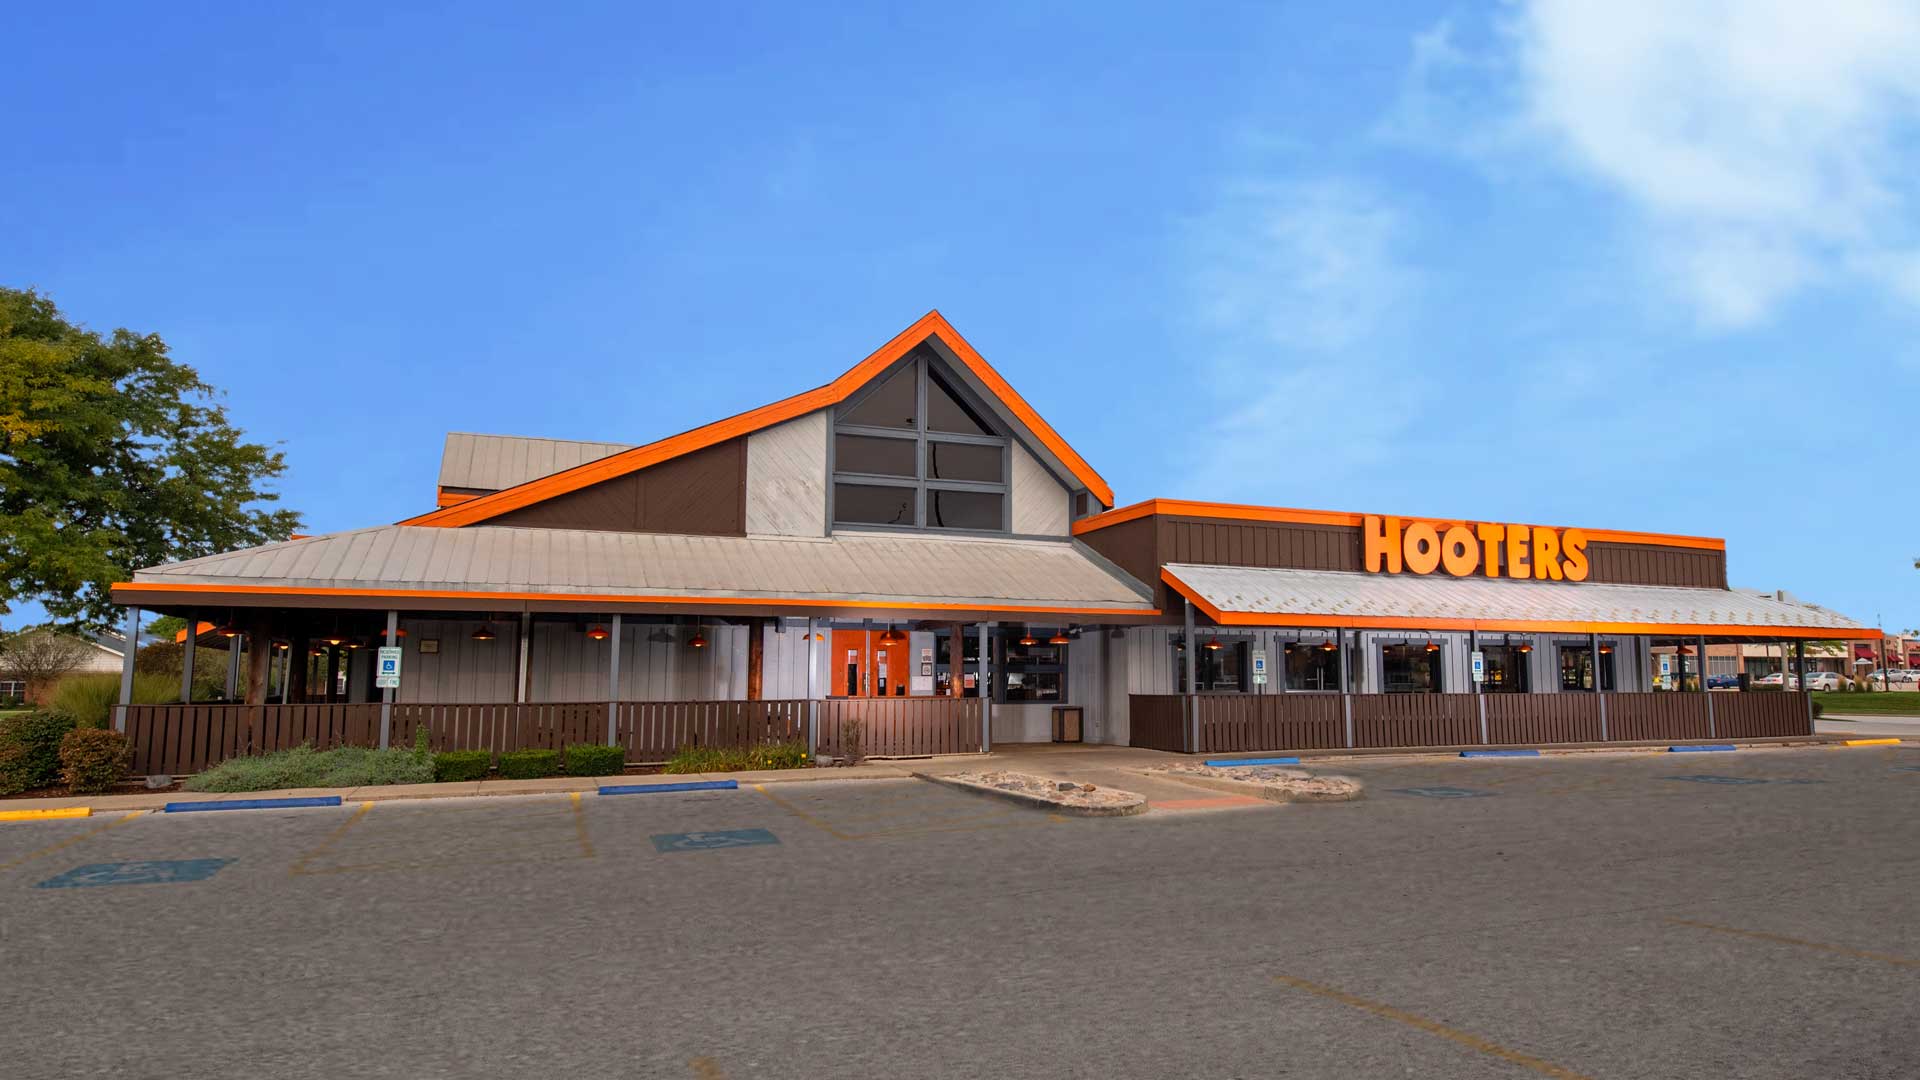 Hooters - Orland Park, IL - Exterior